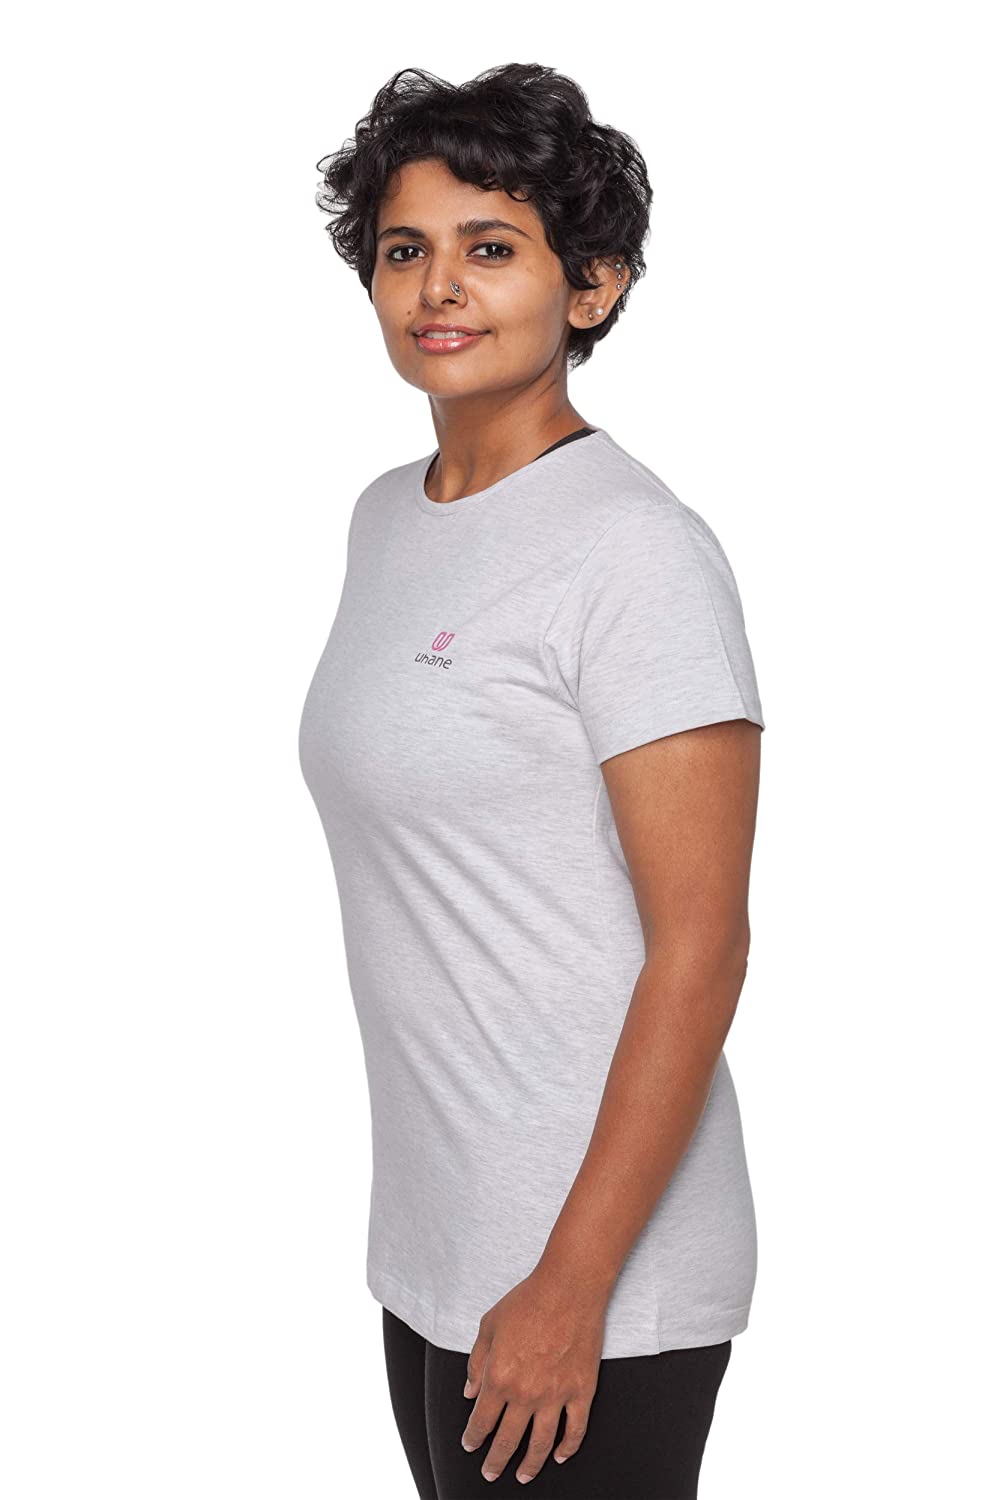 Uhane Women's Yoga and Gym Cotton Work-Out Round Neck Straight Cut Plain T- Shirt (Beige) Short Sleeves Top for Sports and Fitness – Uhane Fitness